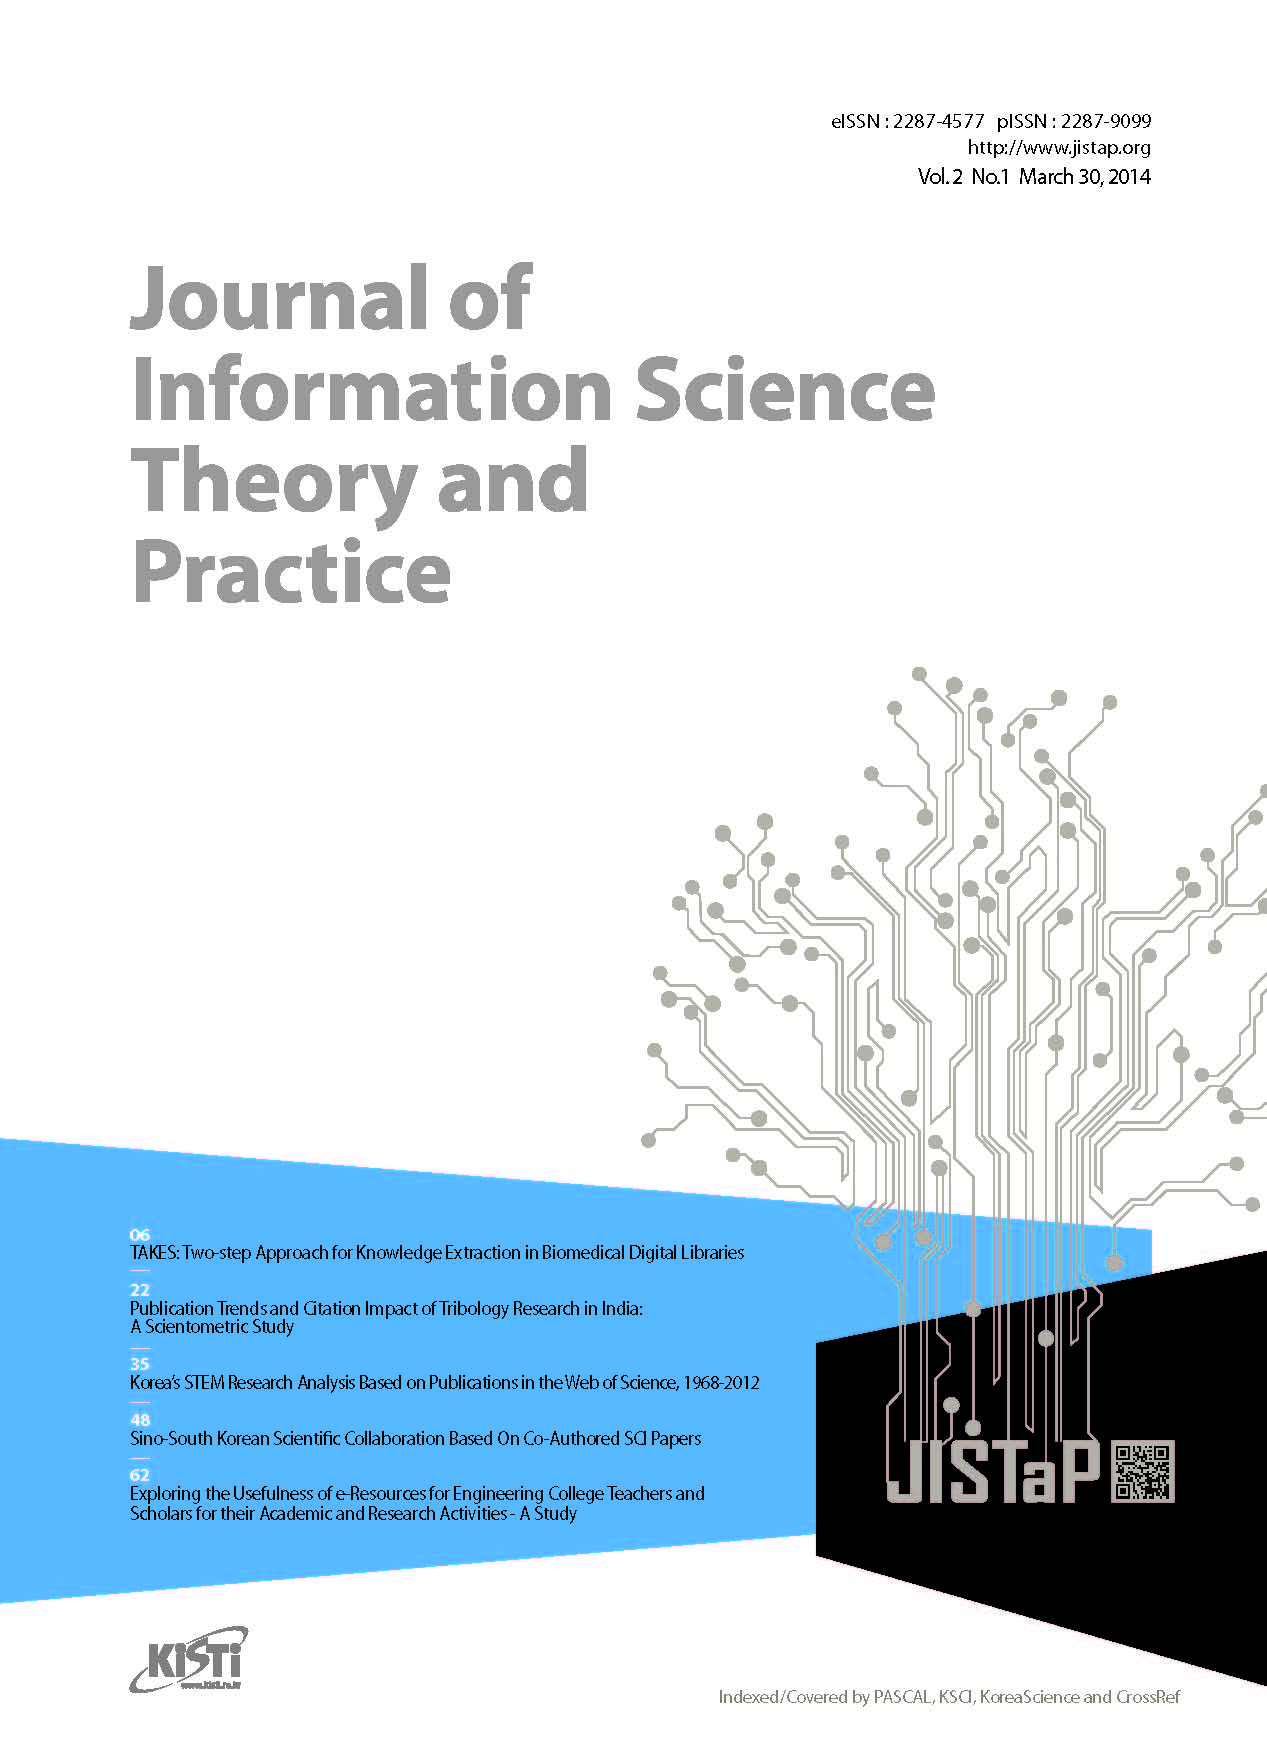 Journal of Information Science Theory and Practice | Korea Science